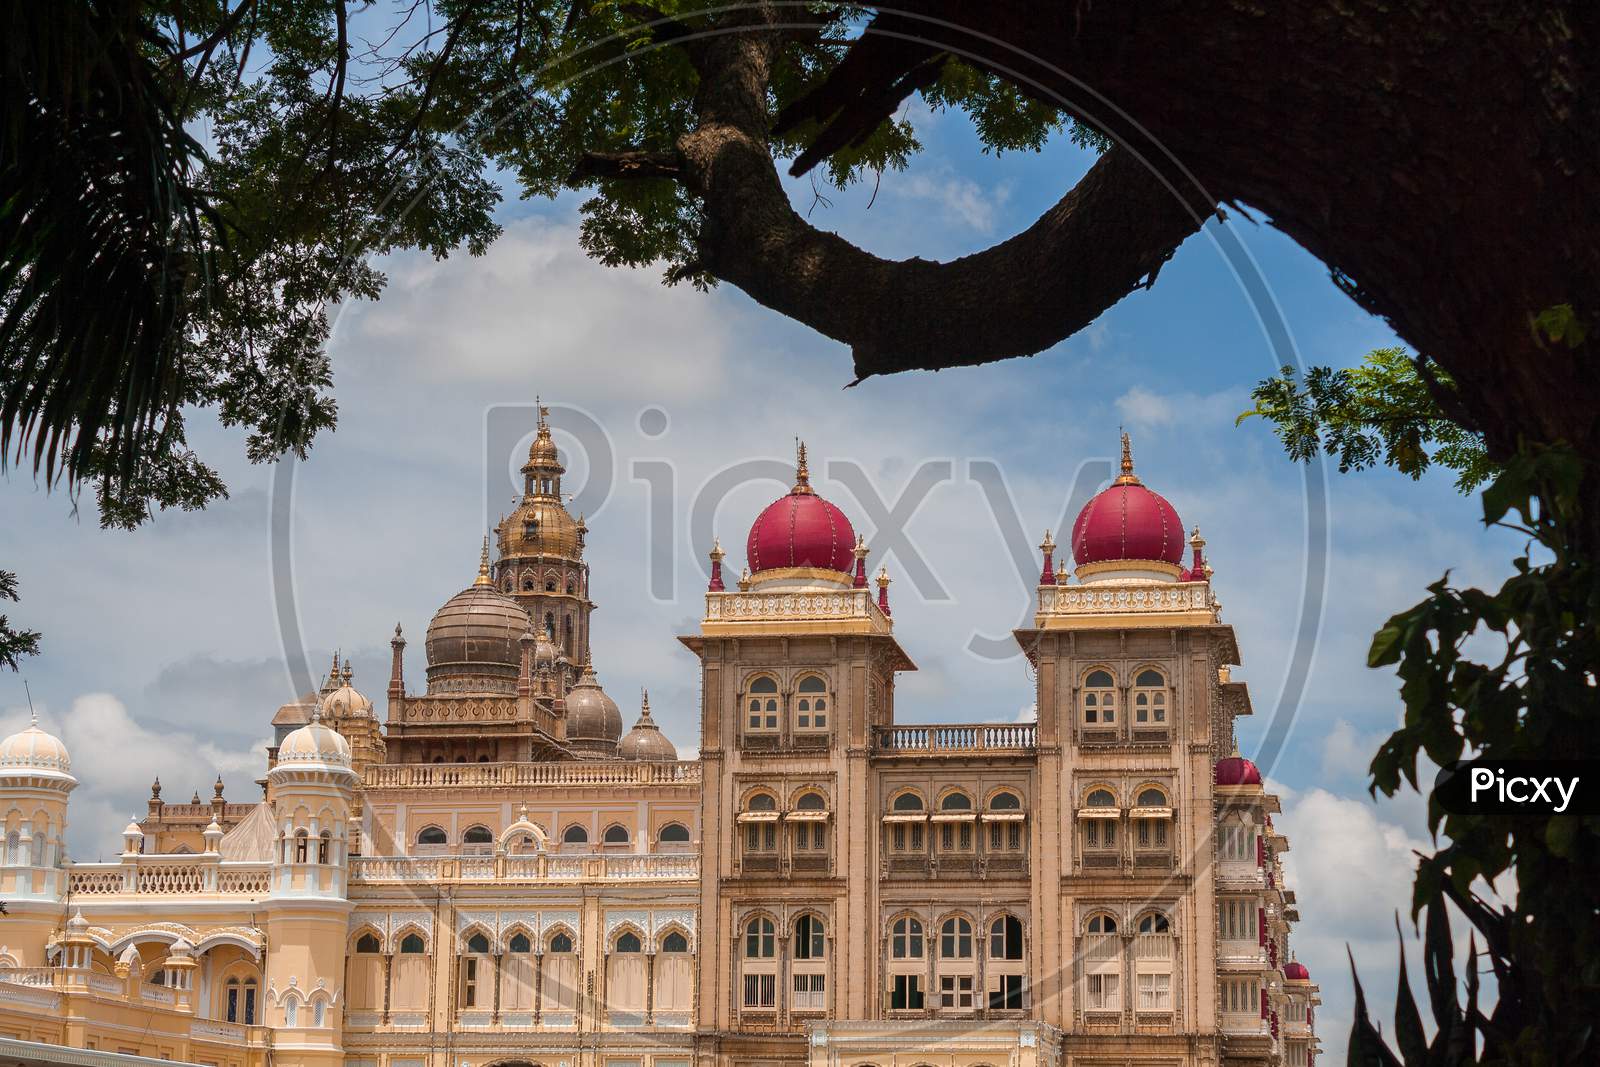 A charming view of the rich Ambavilas Palace in Mysuru.